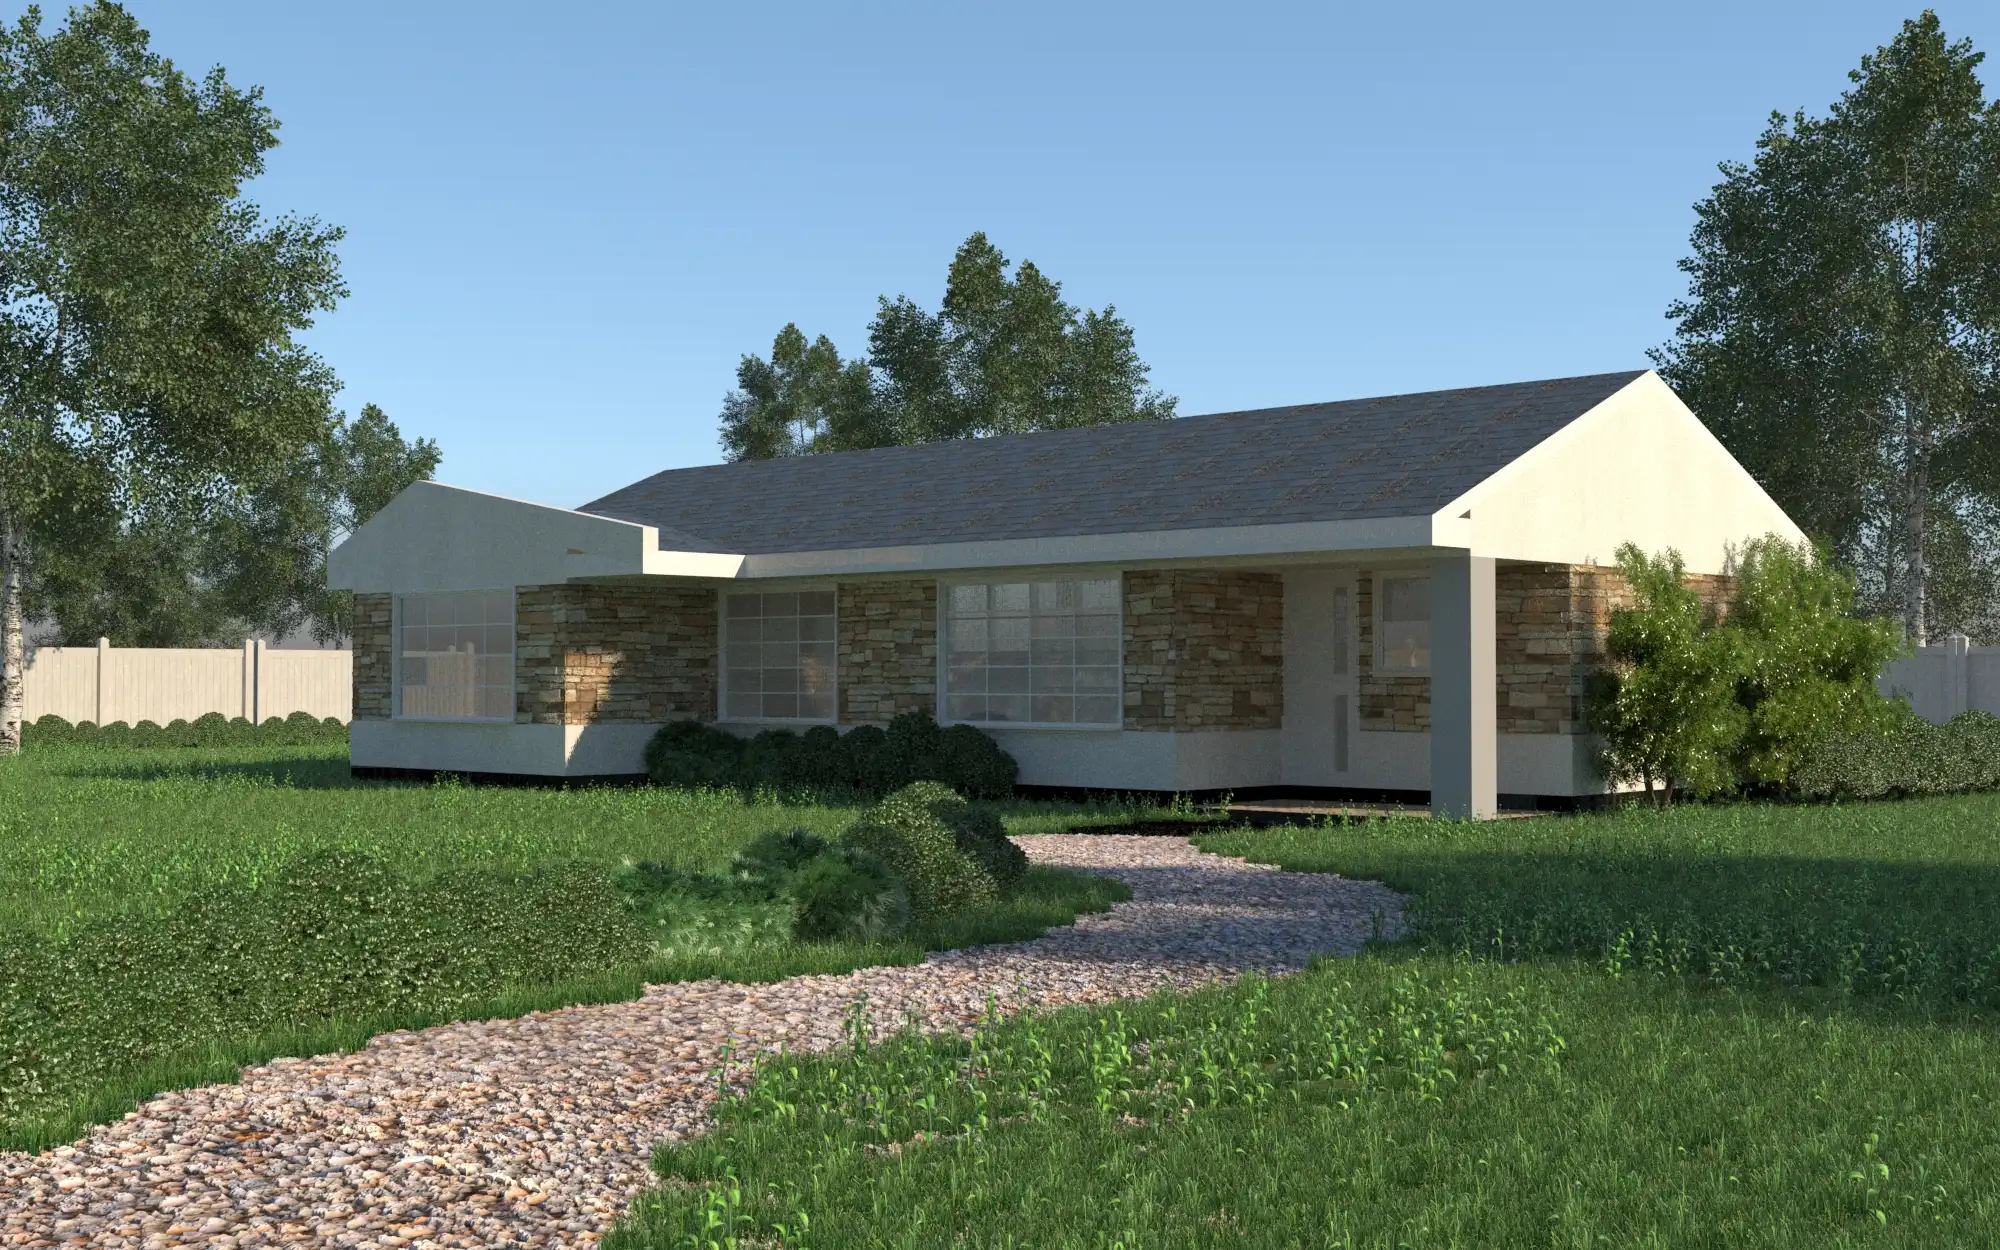 3 Bedroom Bungalow - ID 3153 - 3 BED BNGL TP5 OP3 REAR.jpg from Inuua Tujenge house plans with 3 bedrooms and 2 bathrooms. ( bungalow )